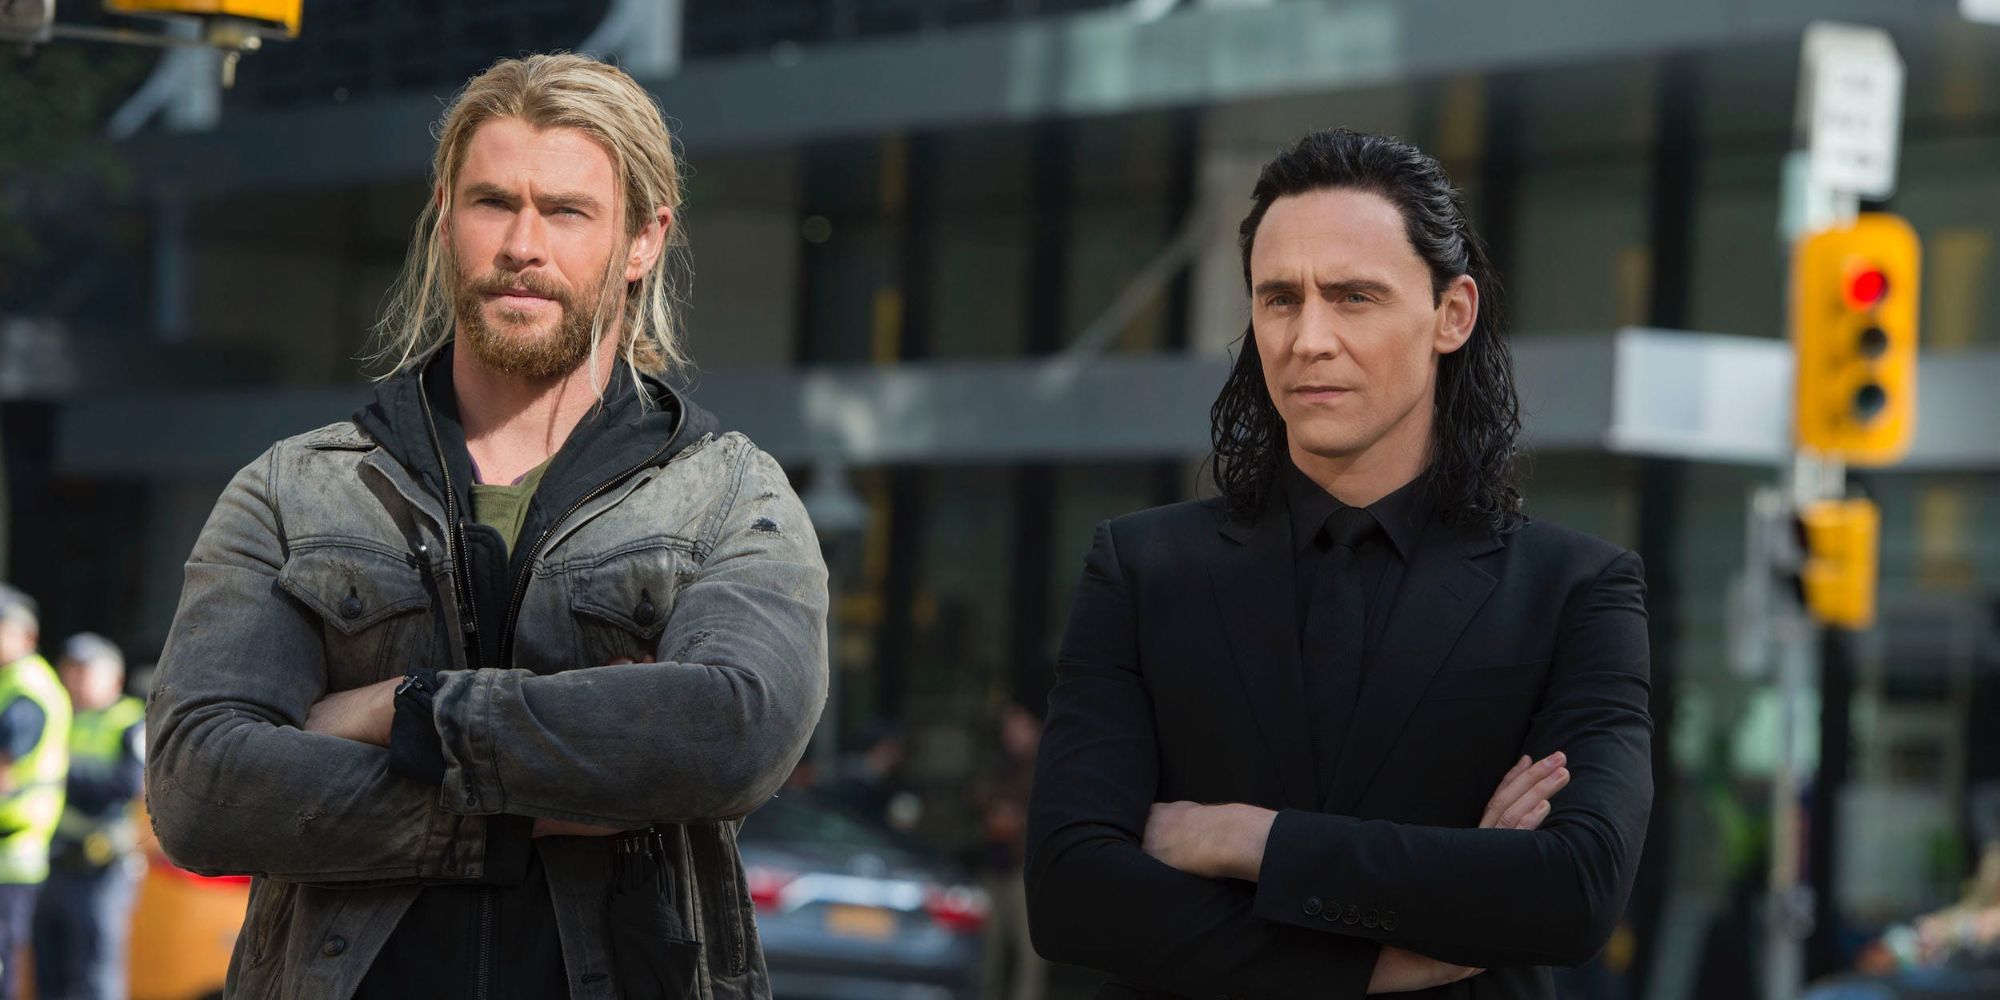 Thor and Loki looking ahead with their arms crossed in Thor: Ragnarok